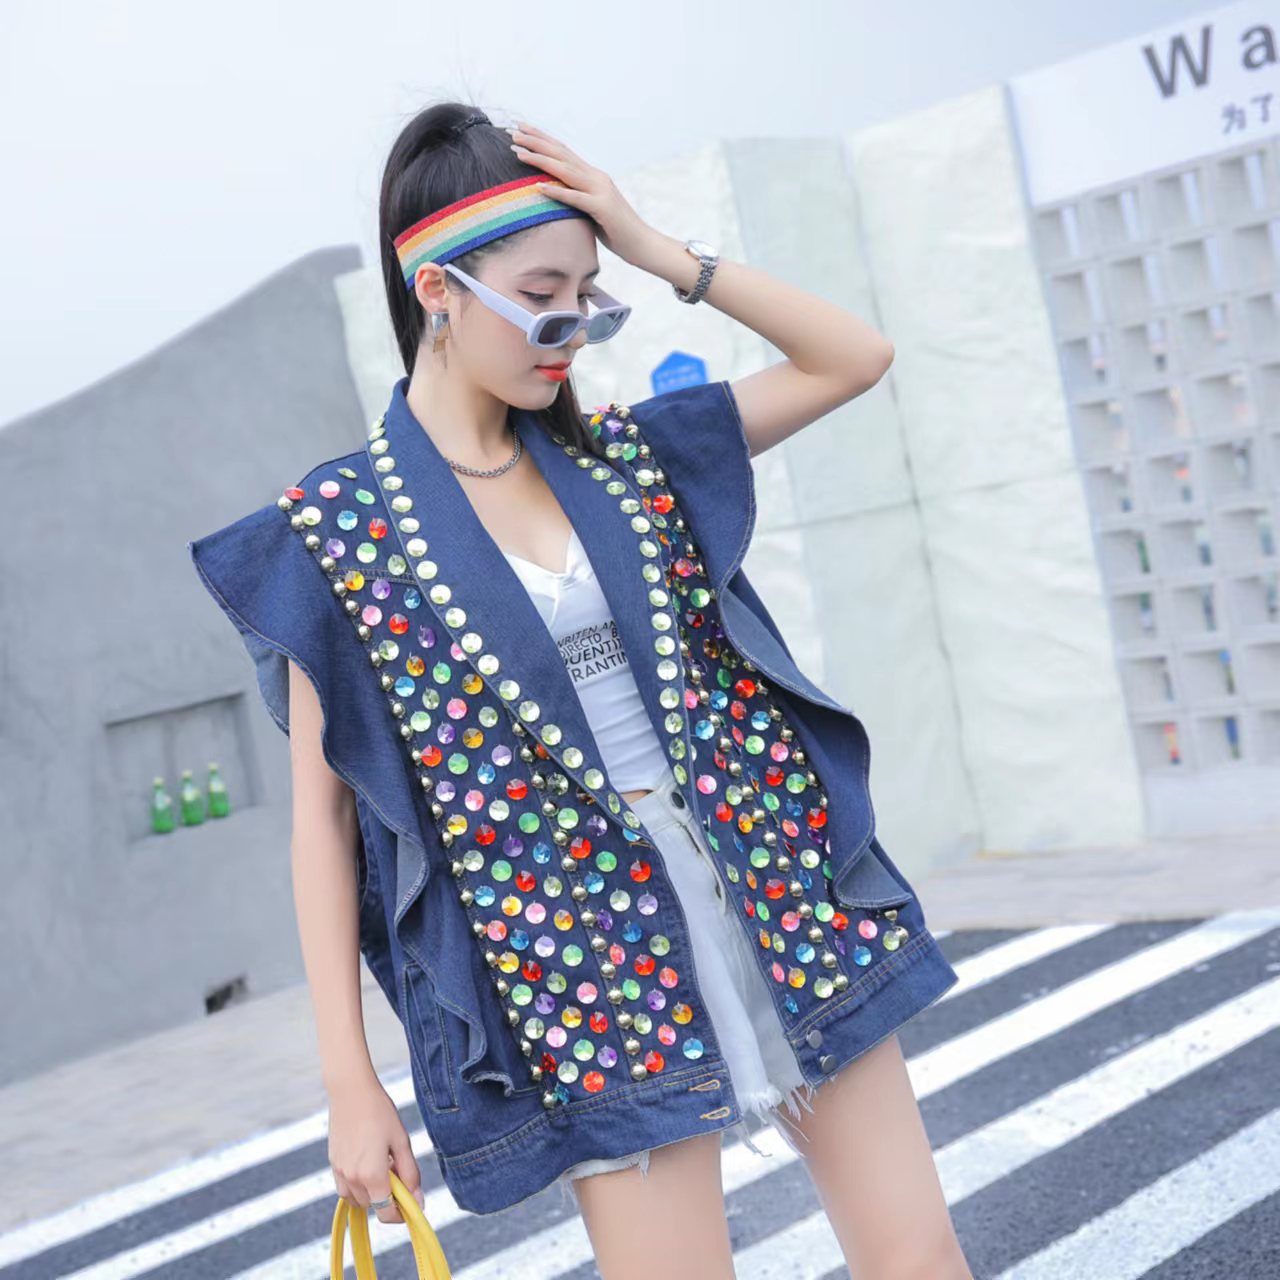 A woman wearing a Maramalive™ Heavy Duty Diamond Studded Denim Vest With Wooden Ear Edge, white shorts, sunglasses, a rainbow headband, and holding a yellow bag, stands on a crosswalk touching her head.